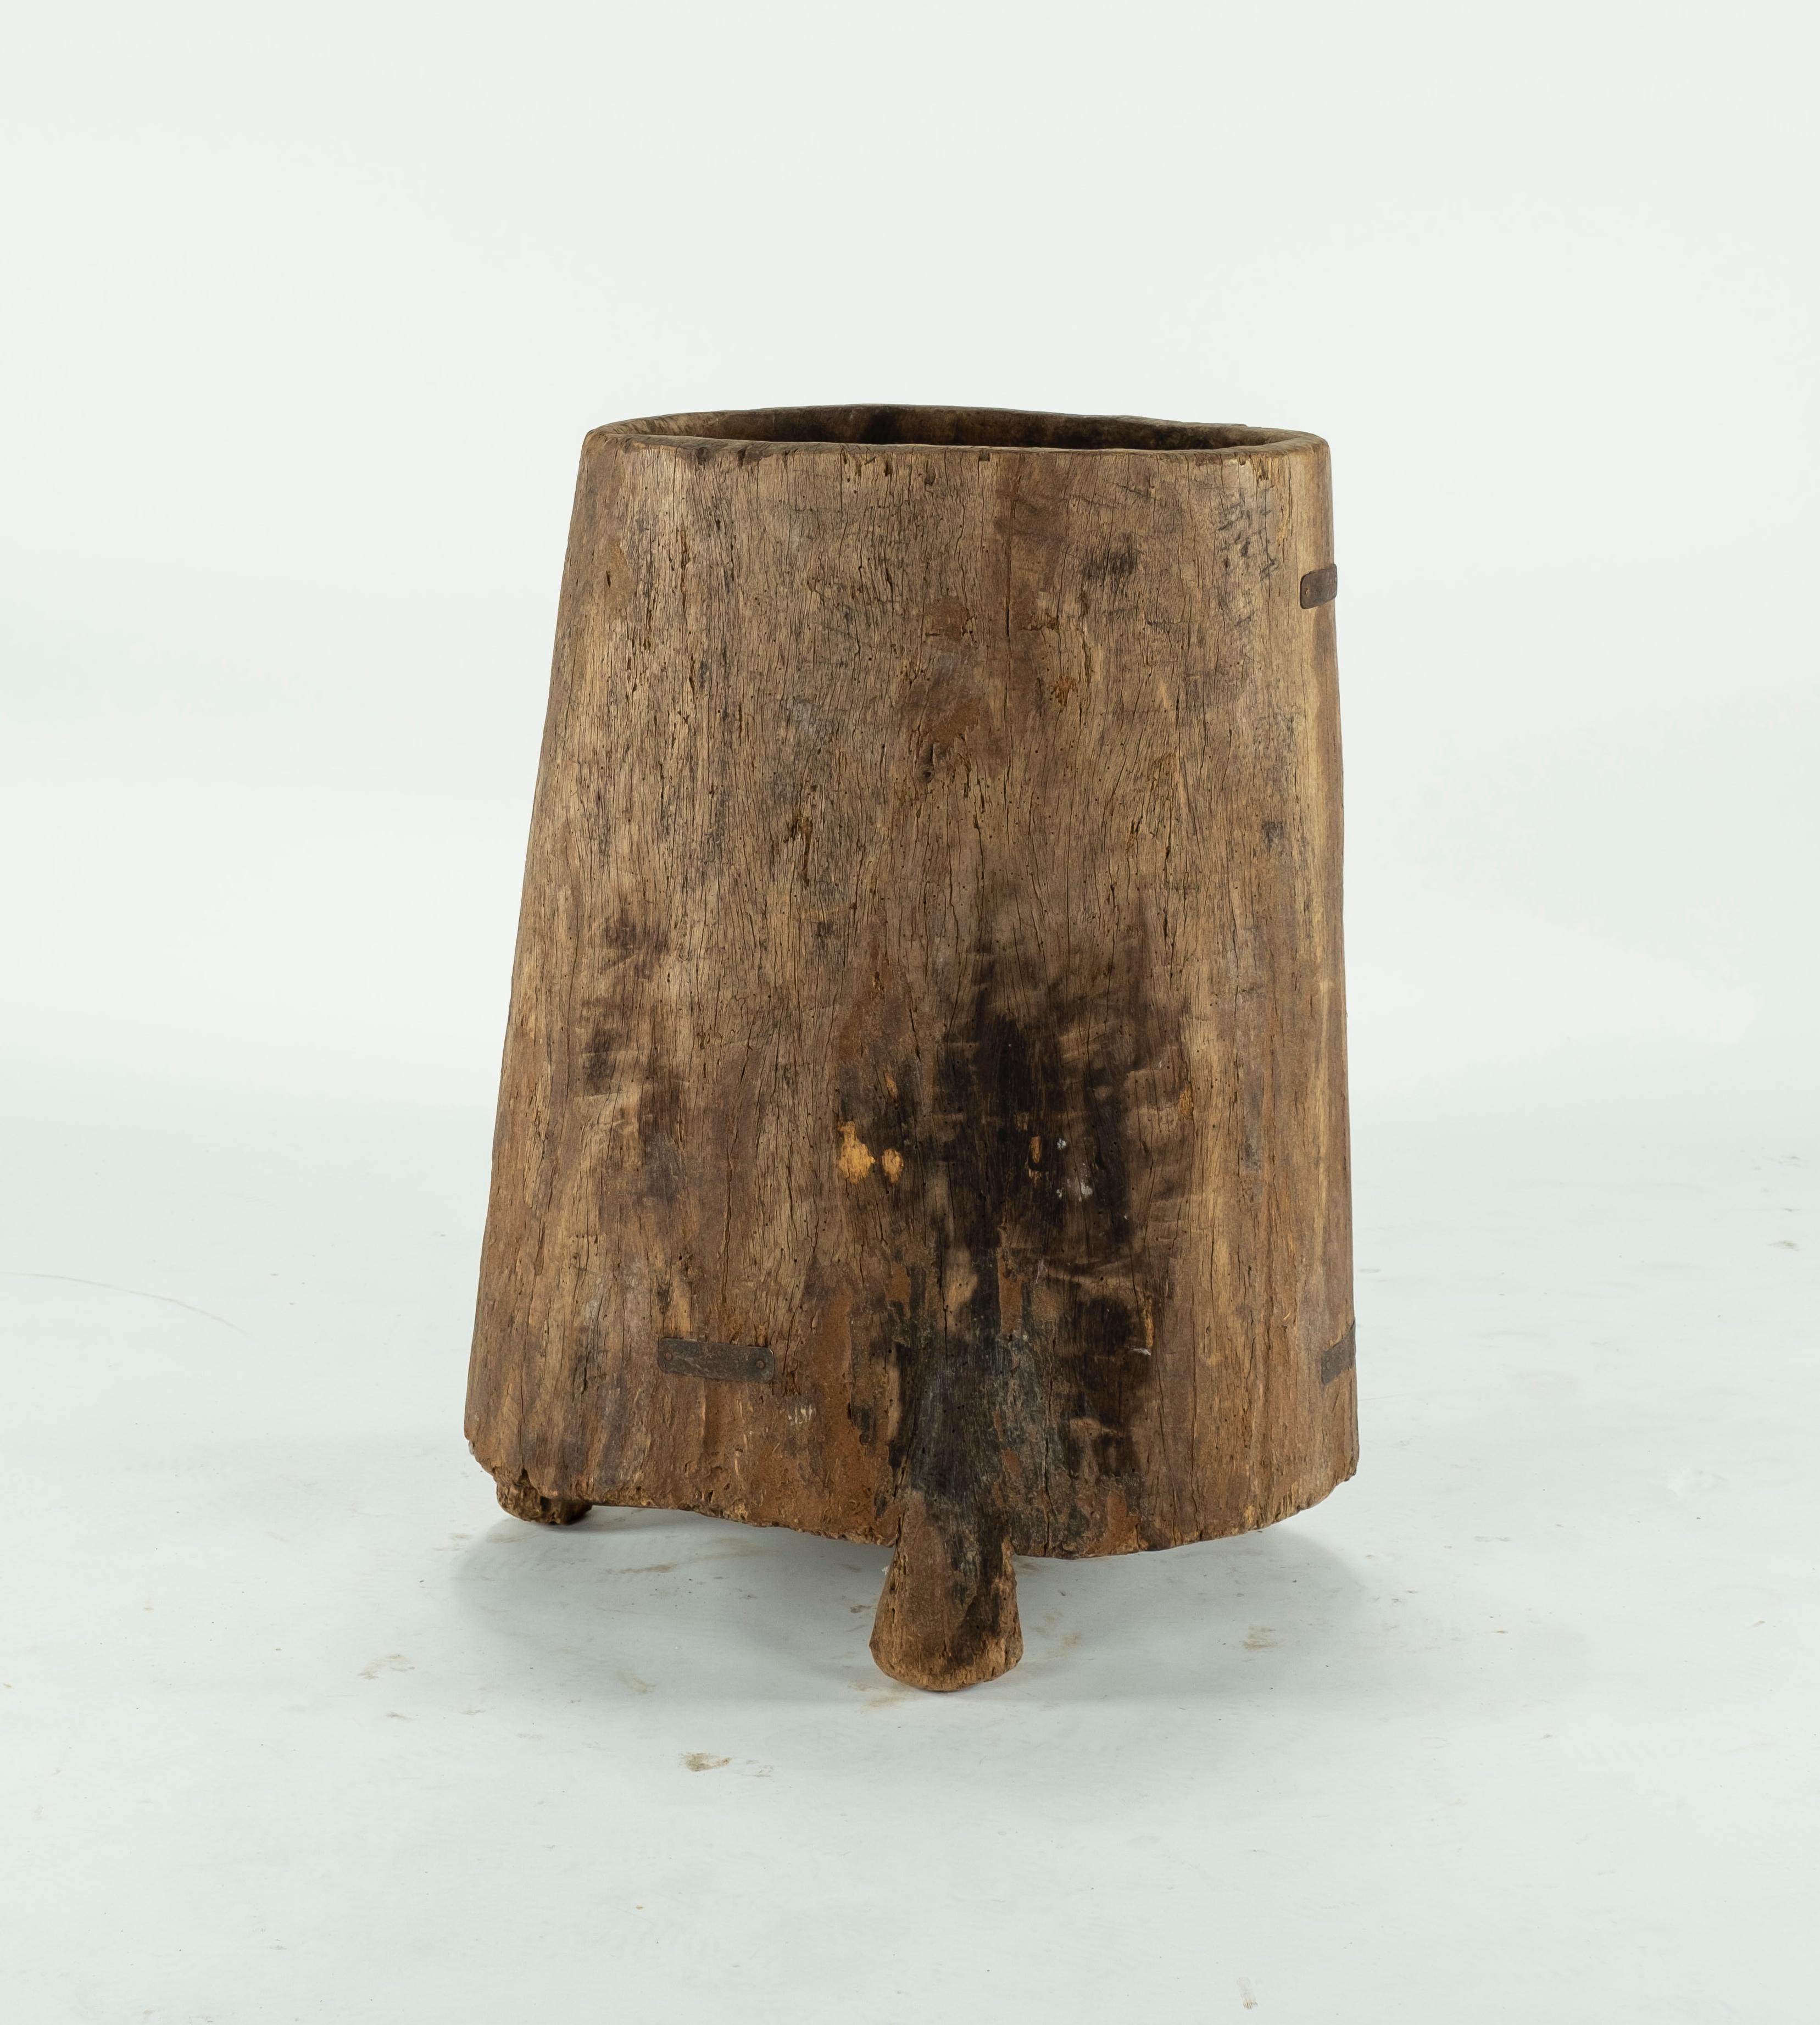 19th century hollowed teak container. Can be used to store firewood or as a planter.